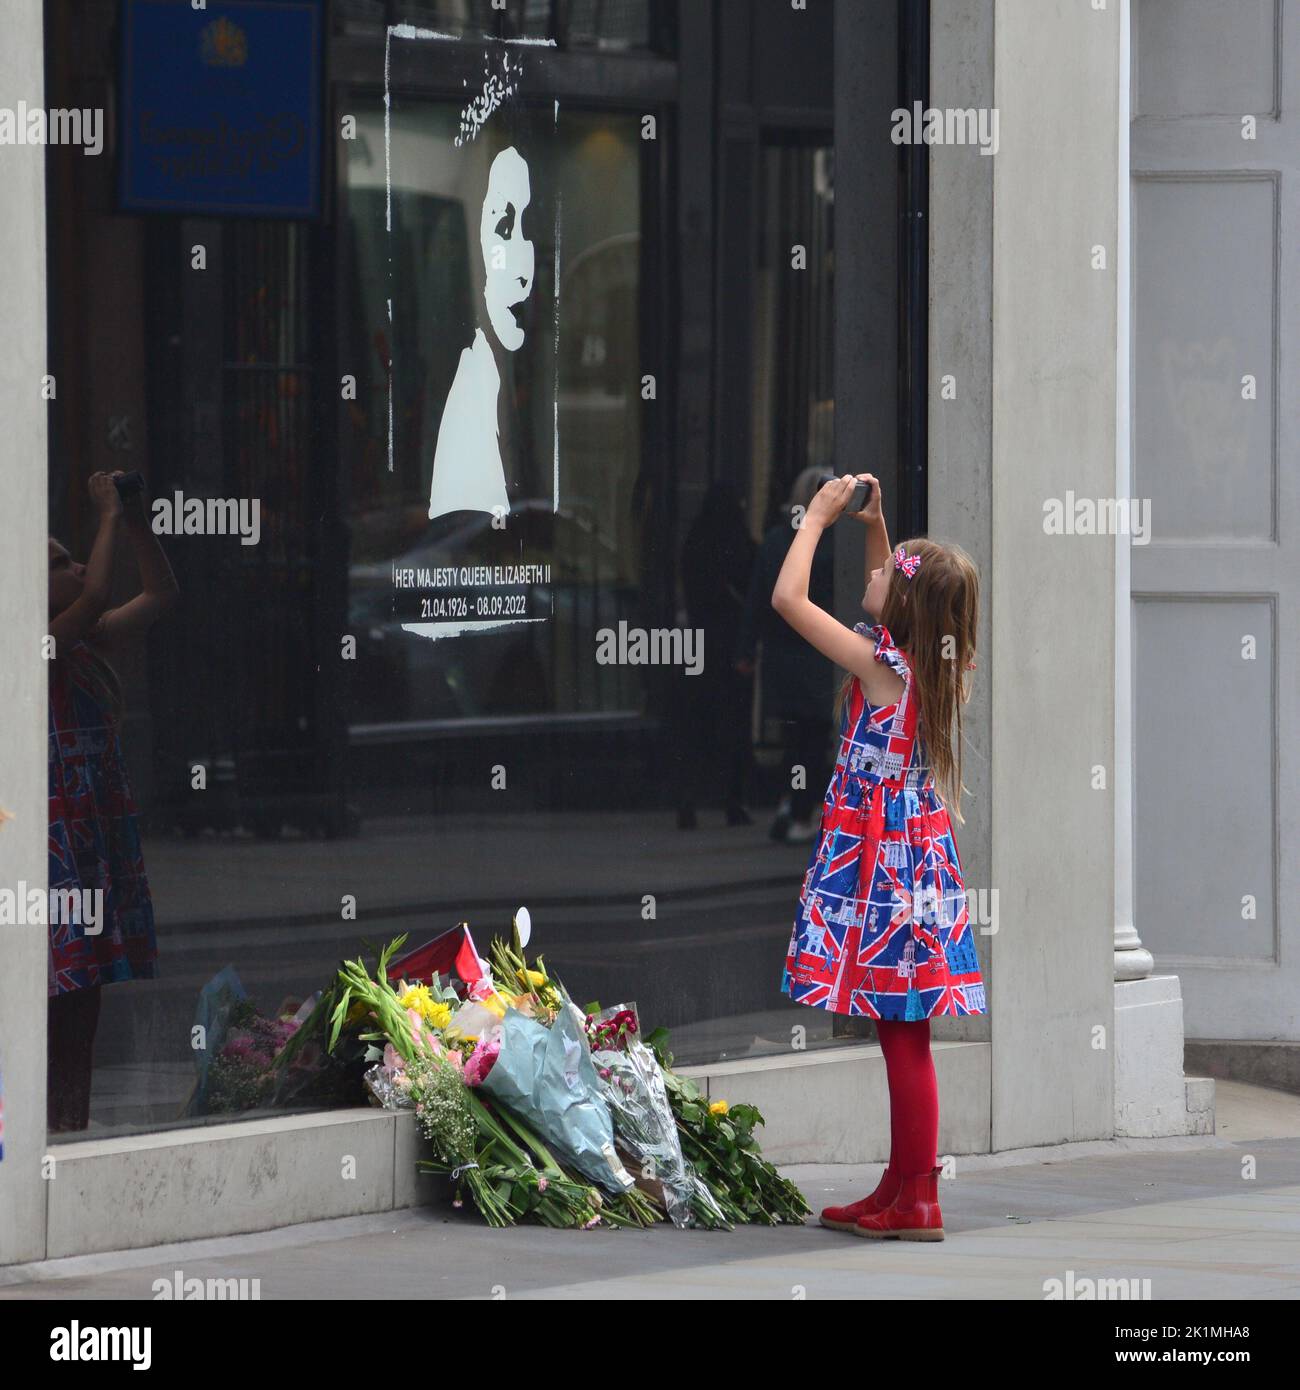 State funeral of Her Majesty Queen Elizabeth II, London, UK, Monday 19th September 2022. A young girl in a Union Jack dress taking a souvenir photograph of Her Majesty the Queen in a shop window on Old Bond Street. Stock Photo